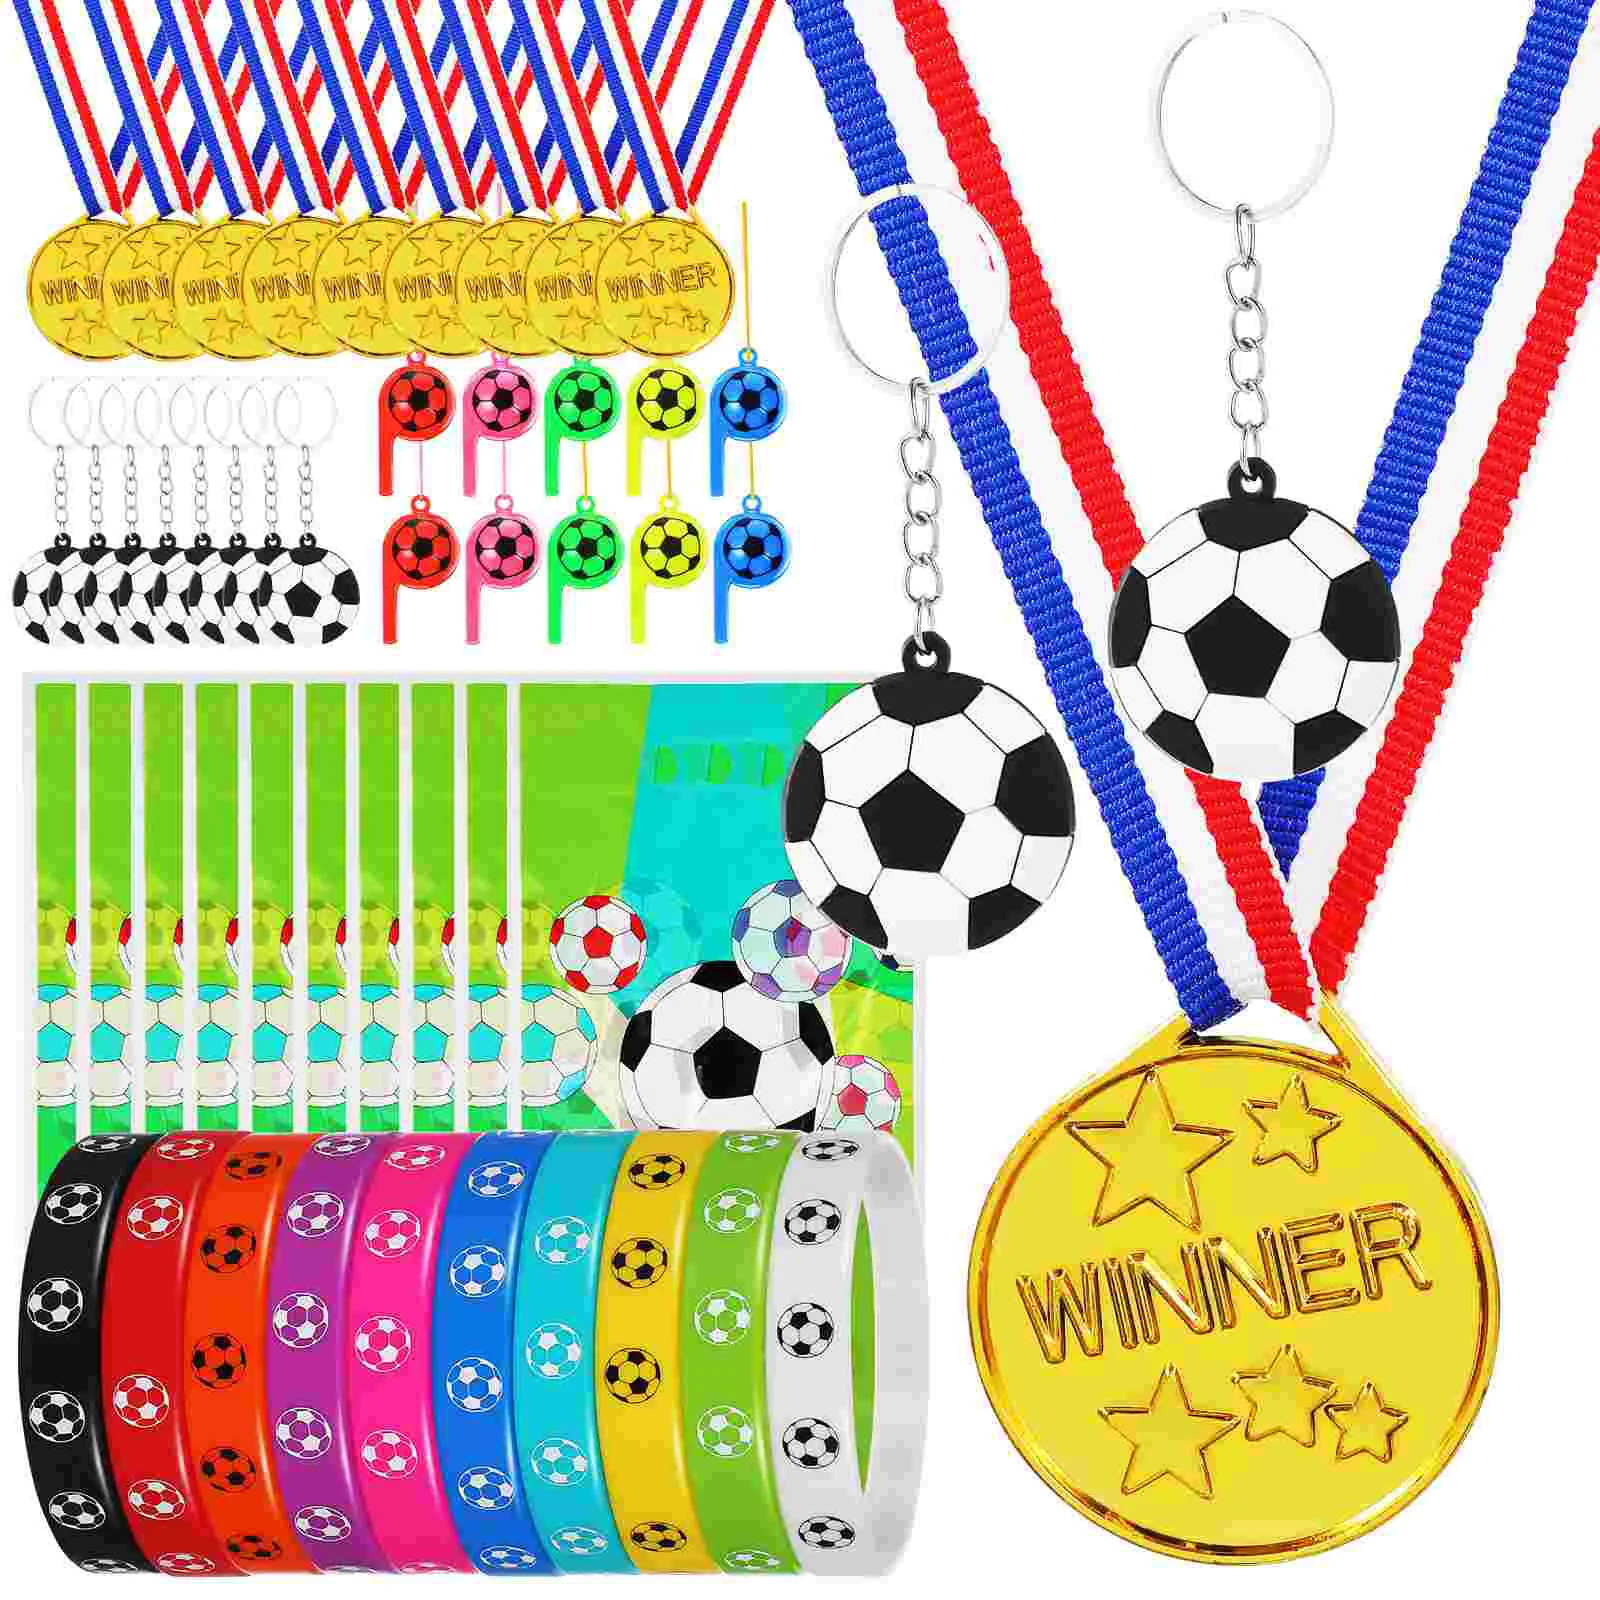 

Football Party Favors Soccer Bag Fillers Gift Supplies Decorative Medal Sports Wrist Bands Key Ring